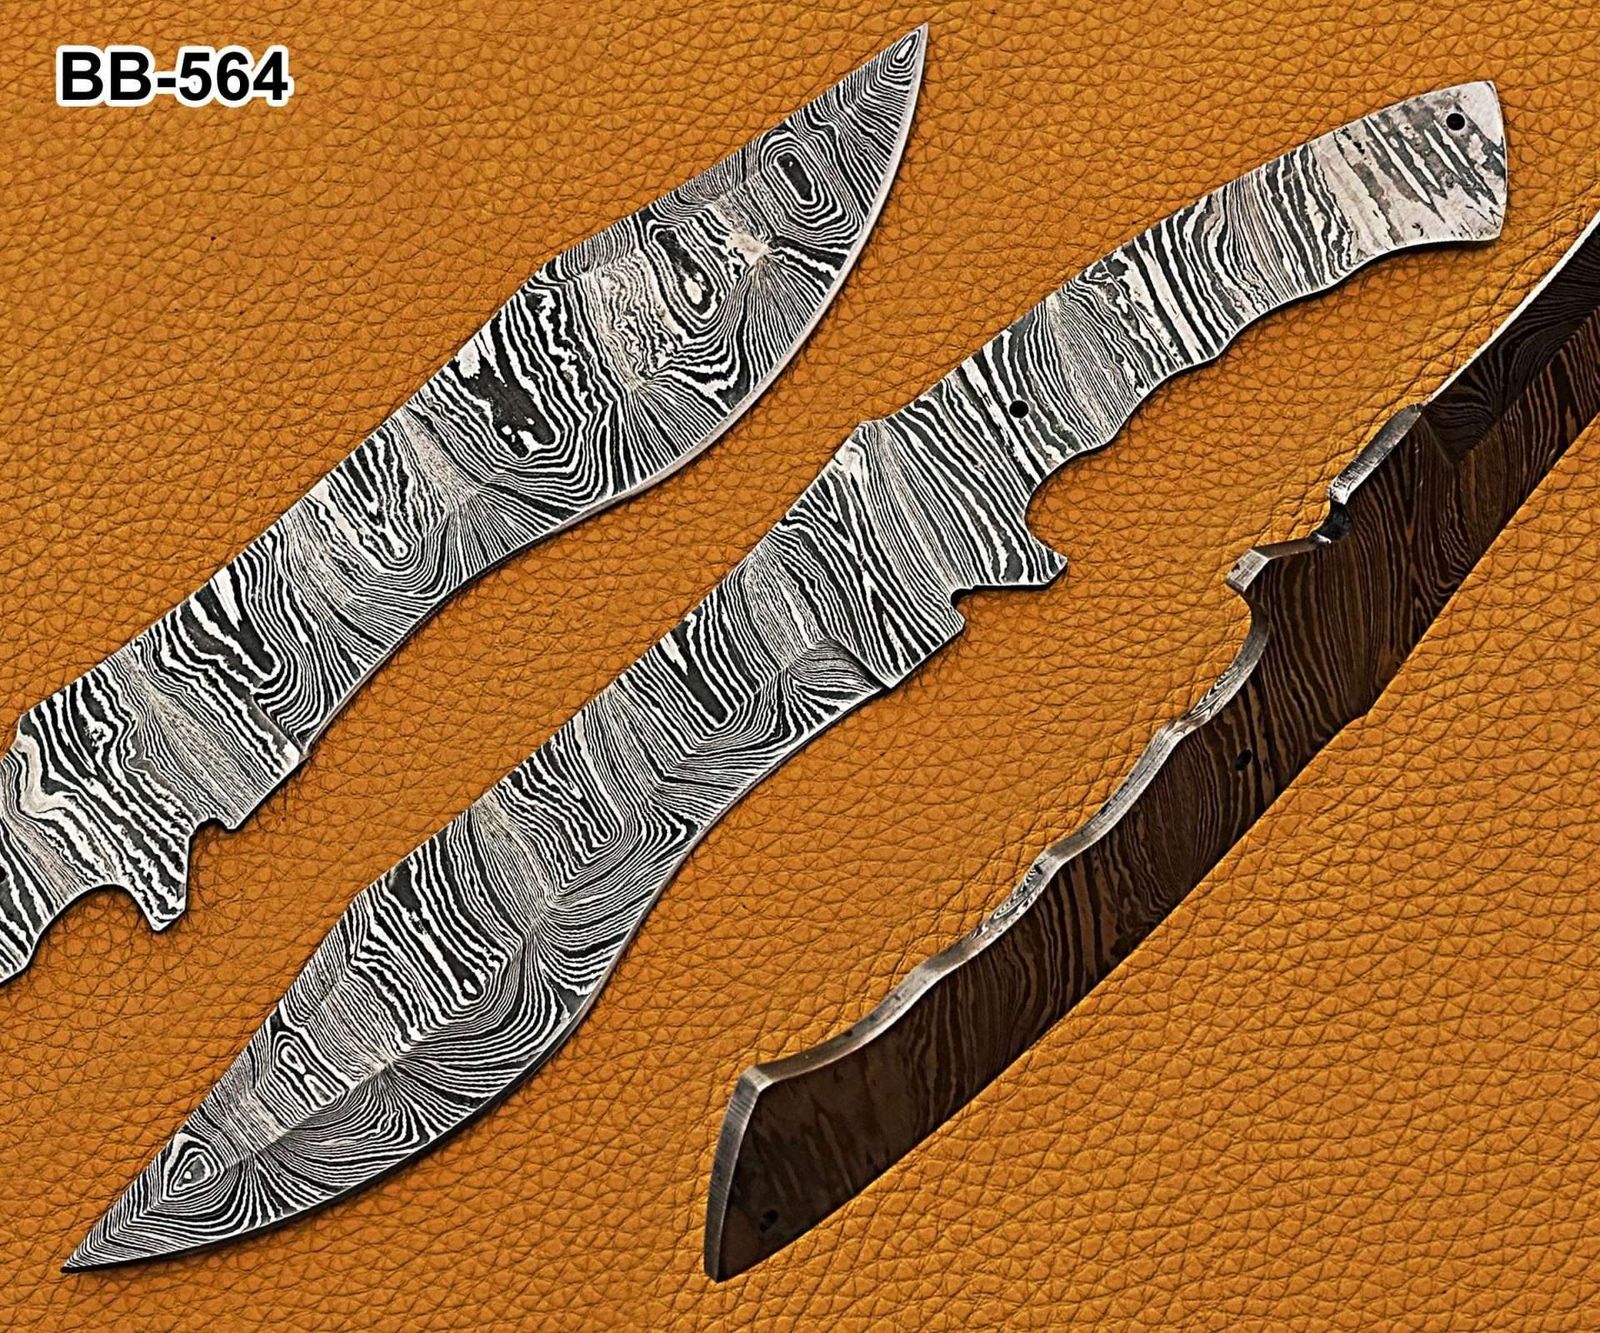 11 inches Long Dao Blade Hunting Knife, Hand Forged Ladder Pattern Damascus Steel Blade, 5" Finger Serration Scale Space with 4 Pin Hole, 6" Trailing Point Dao Blade with 5.5" Cutting Edge